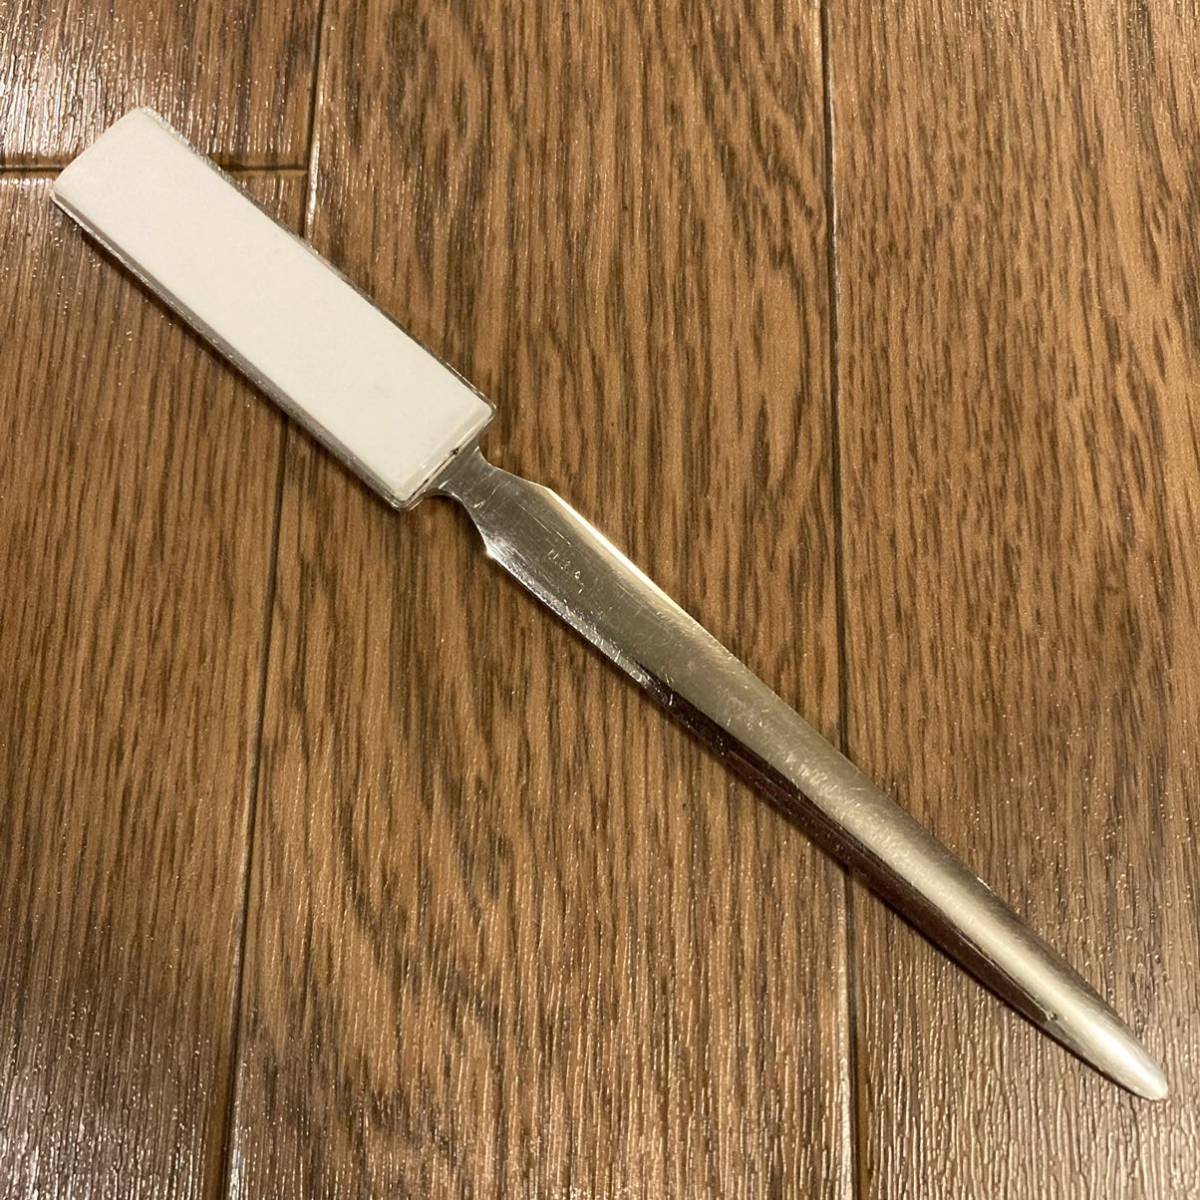  free shipping US Vintage letter opener COLONIAL paper-knife 